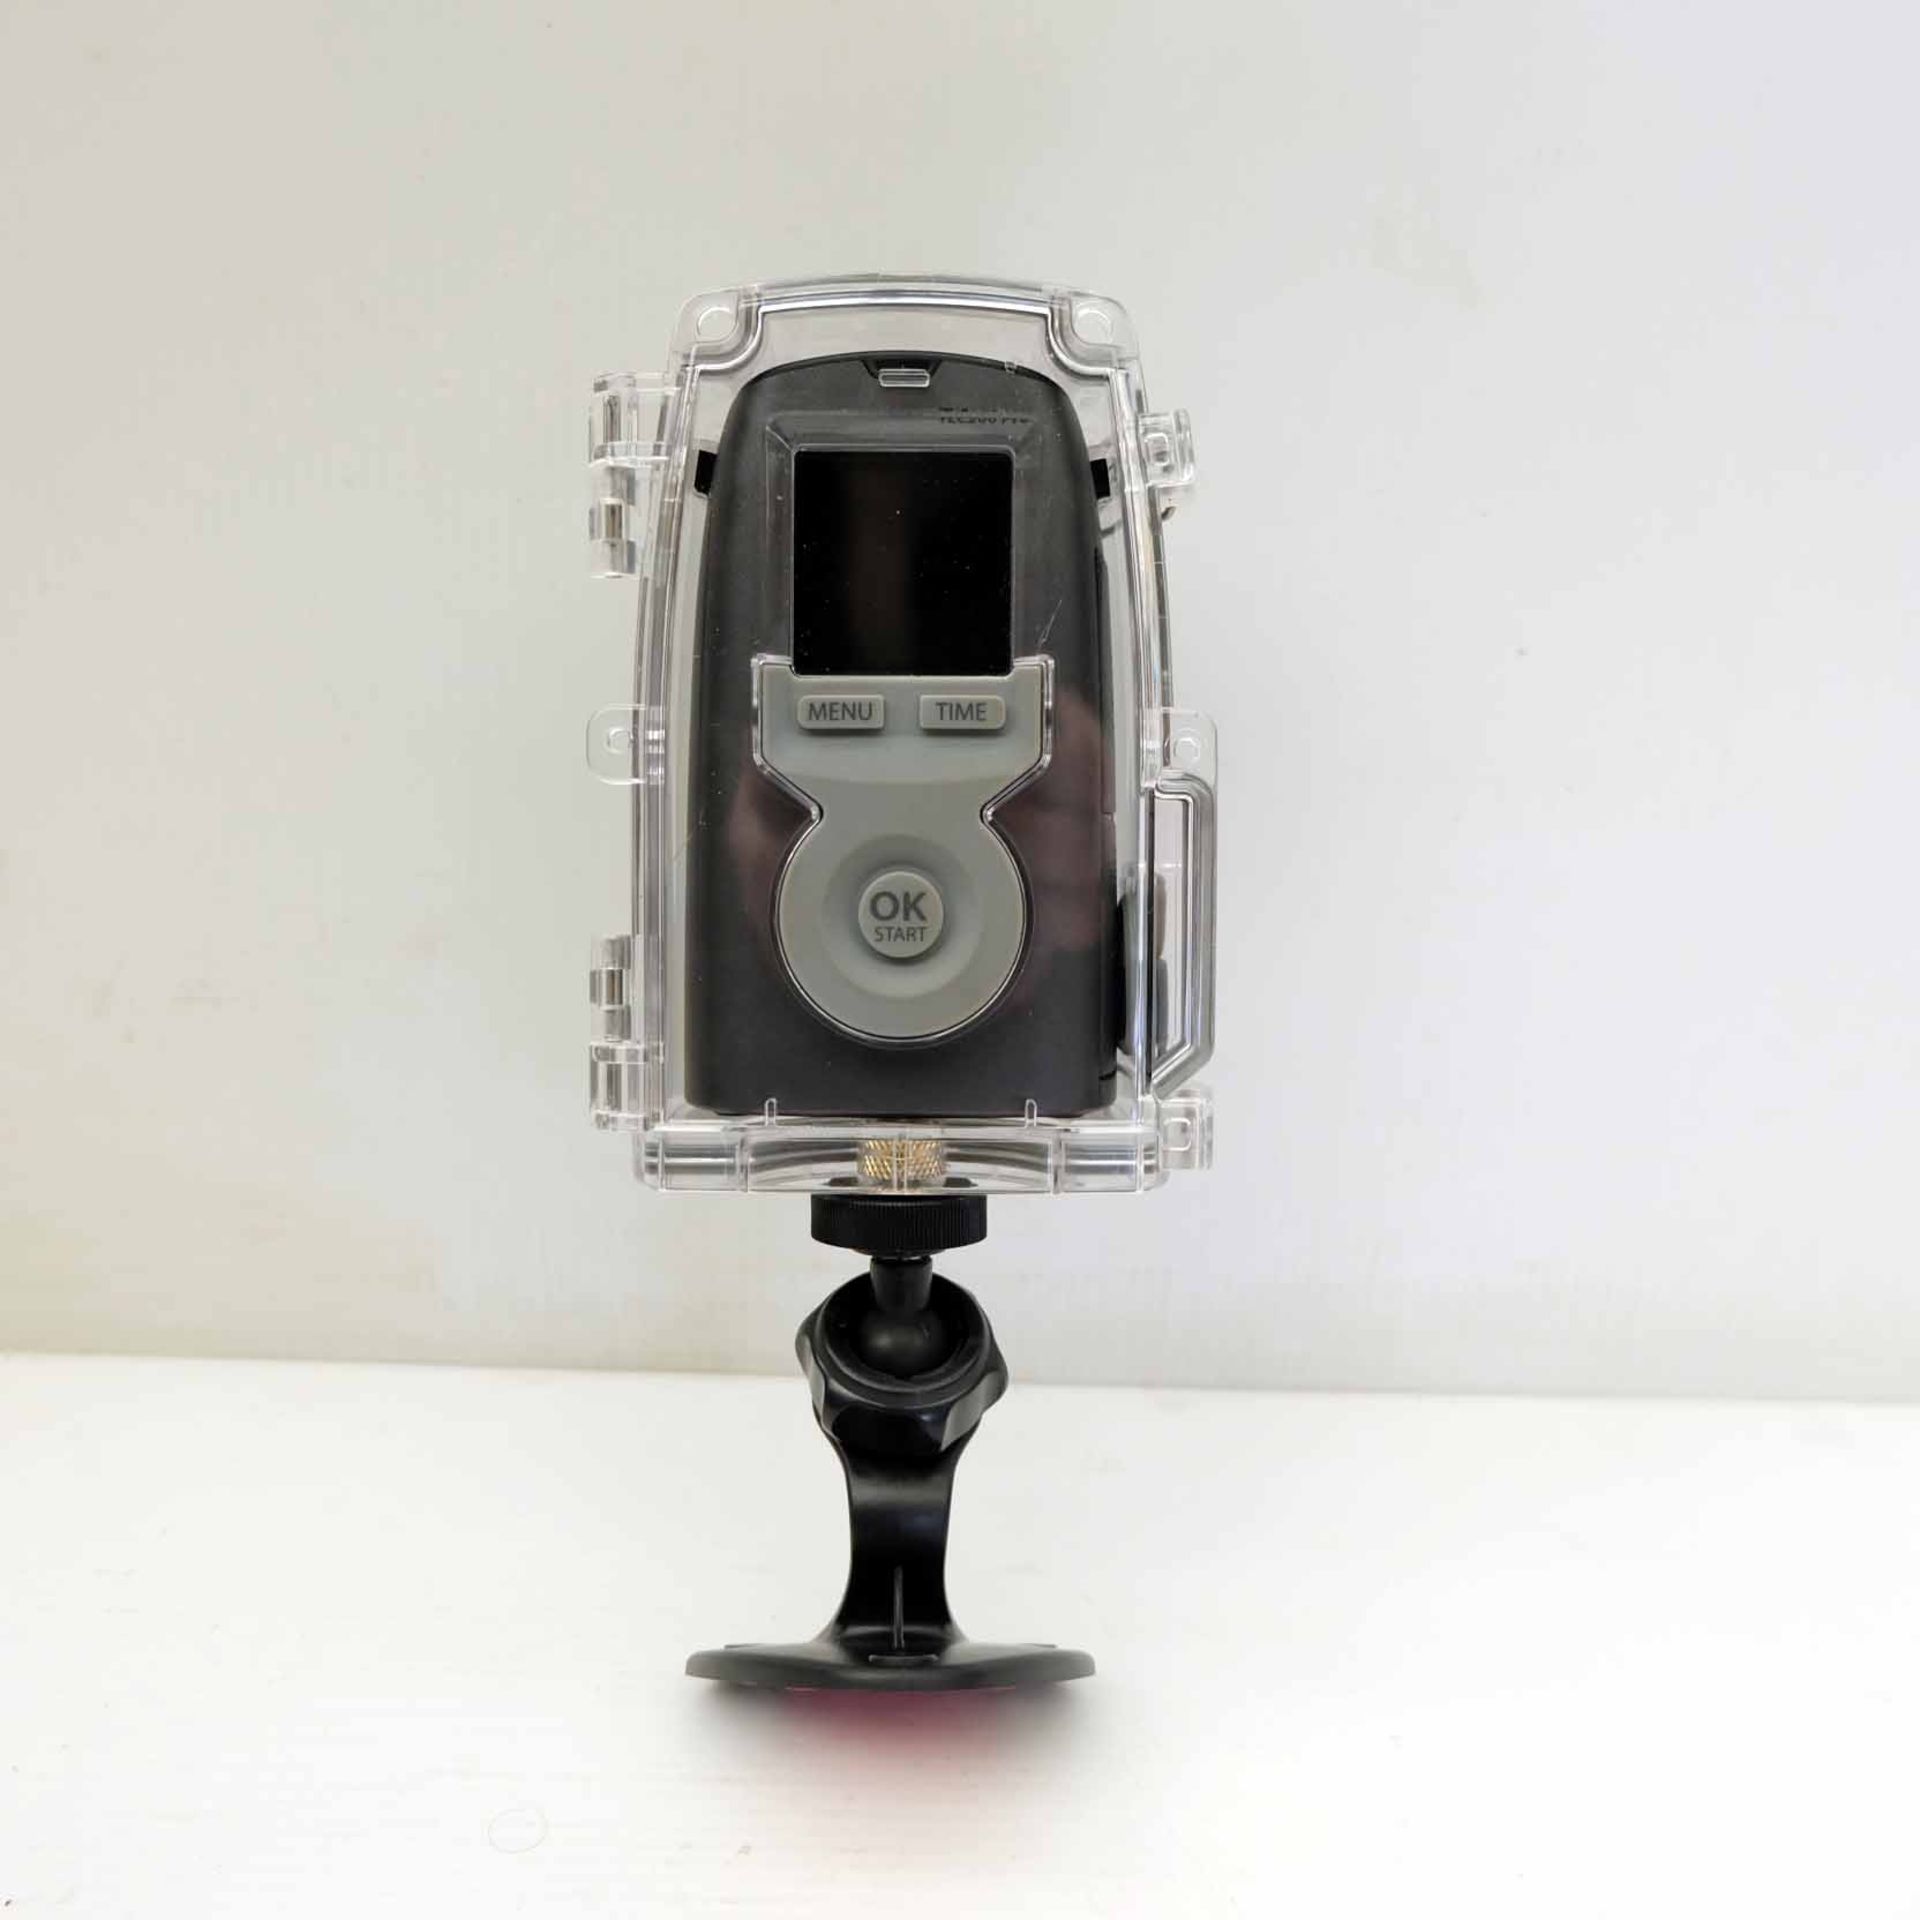 Brinno TLC200Pro Time Lapse Camera. In Waterproof Protective Case. Battery Operated. - Image 2 of 7